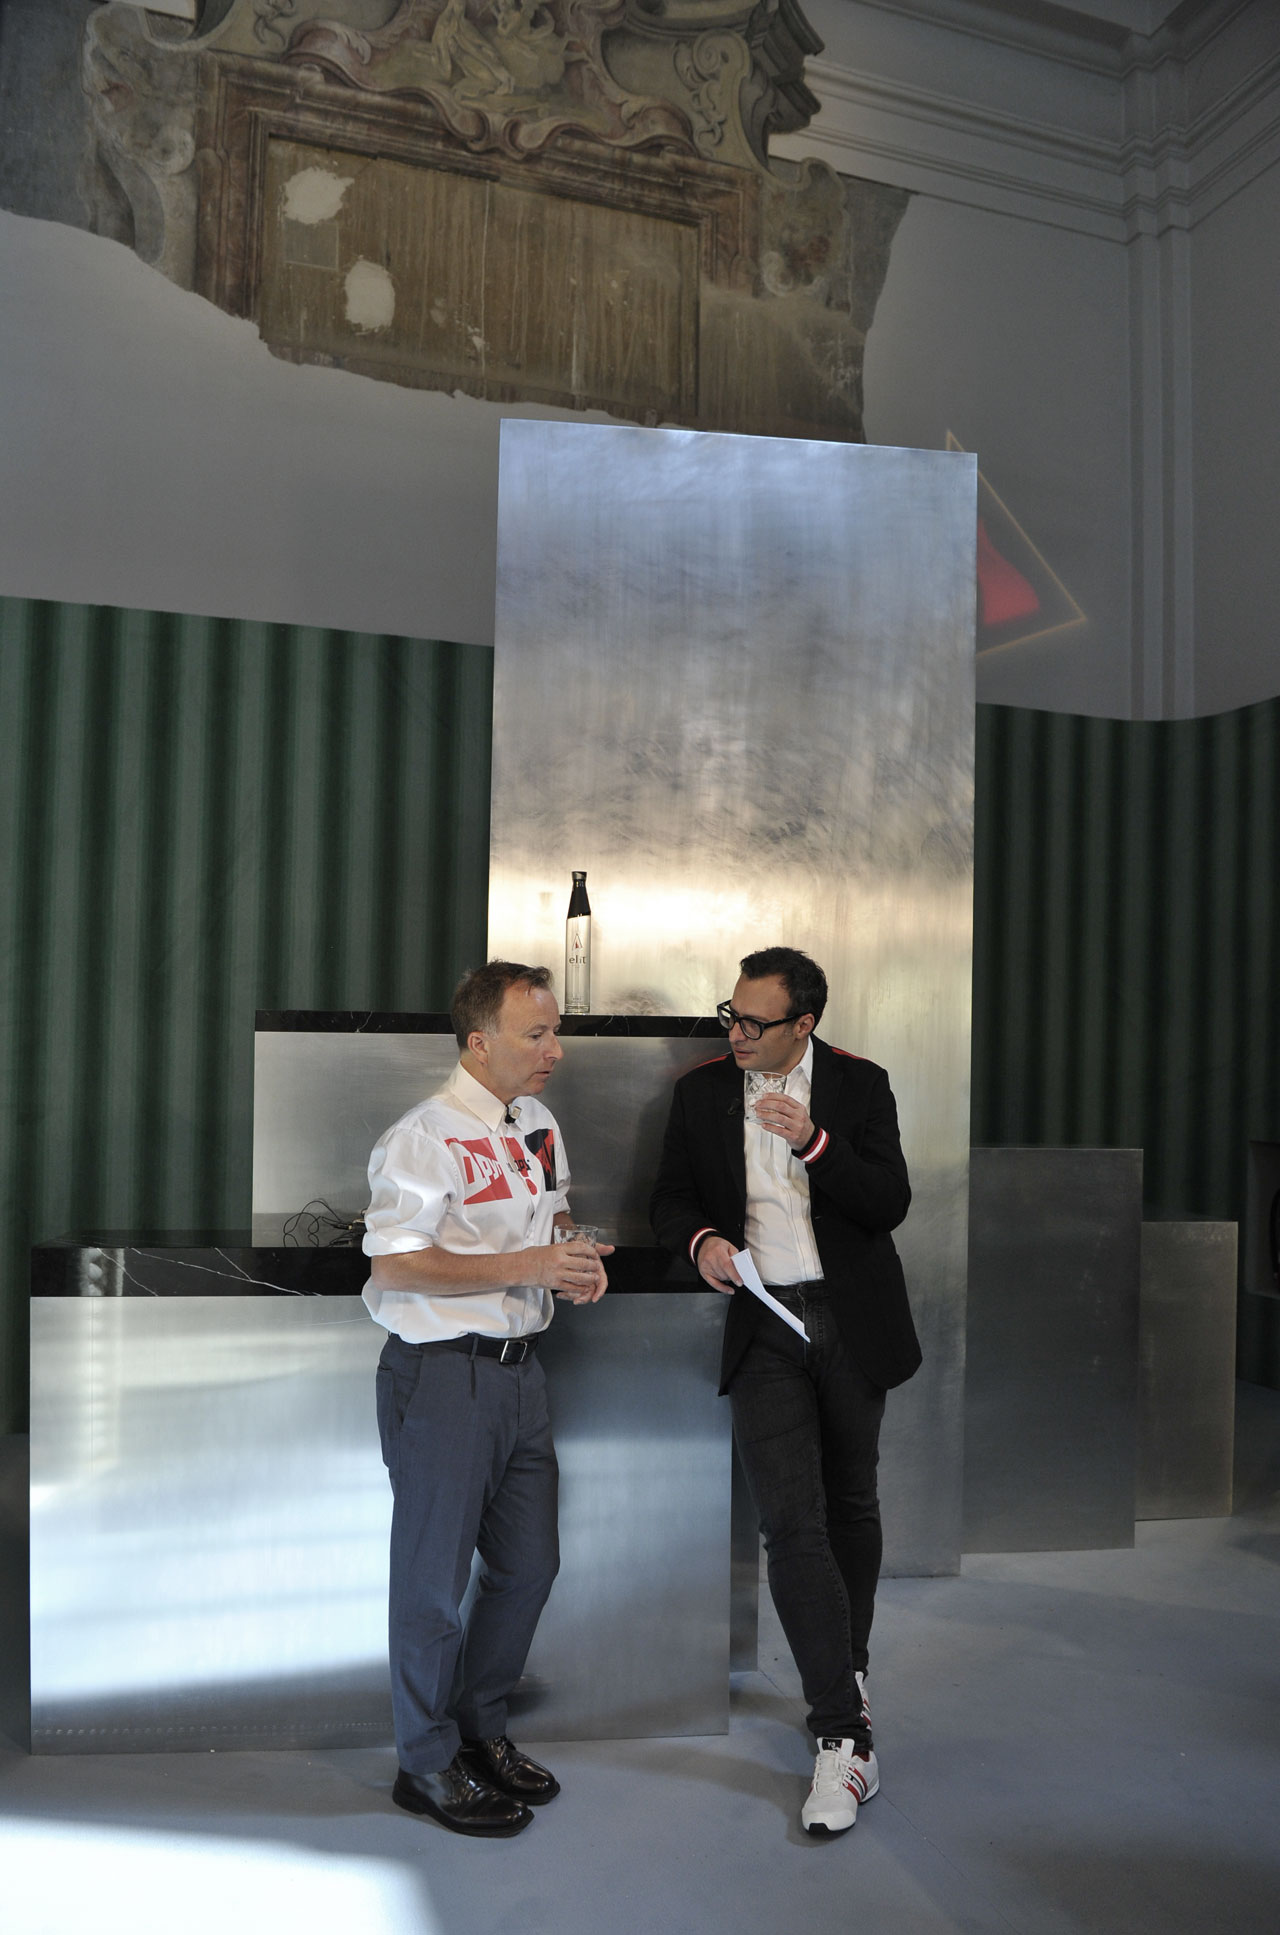 Tony Chambers of Wallpaper* with Vadim Grigoryan, creative director of elit® Vodka by the ELIT PROUN BAR at MDW18.